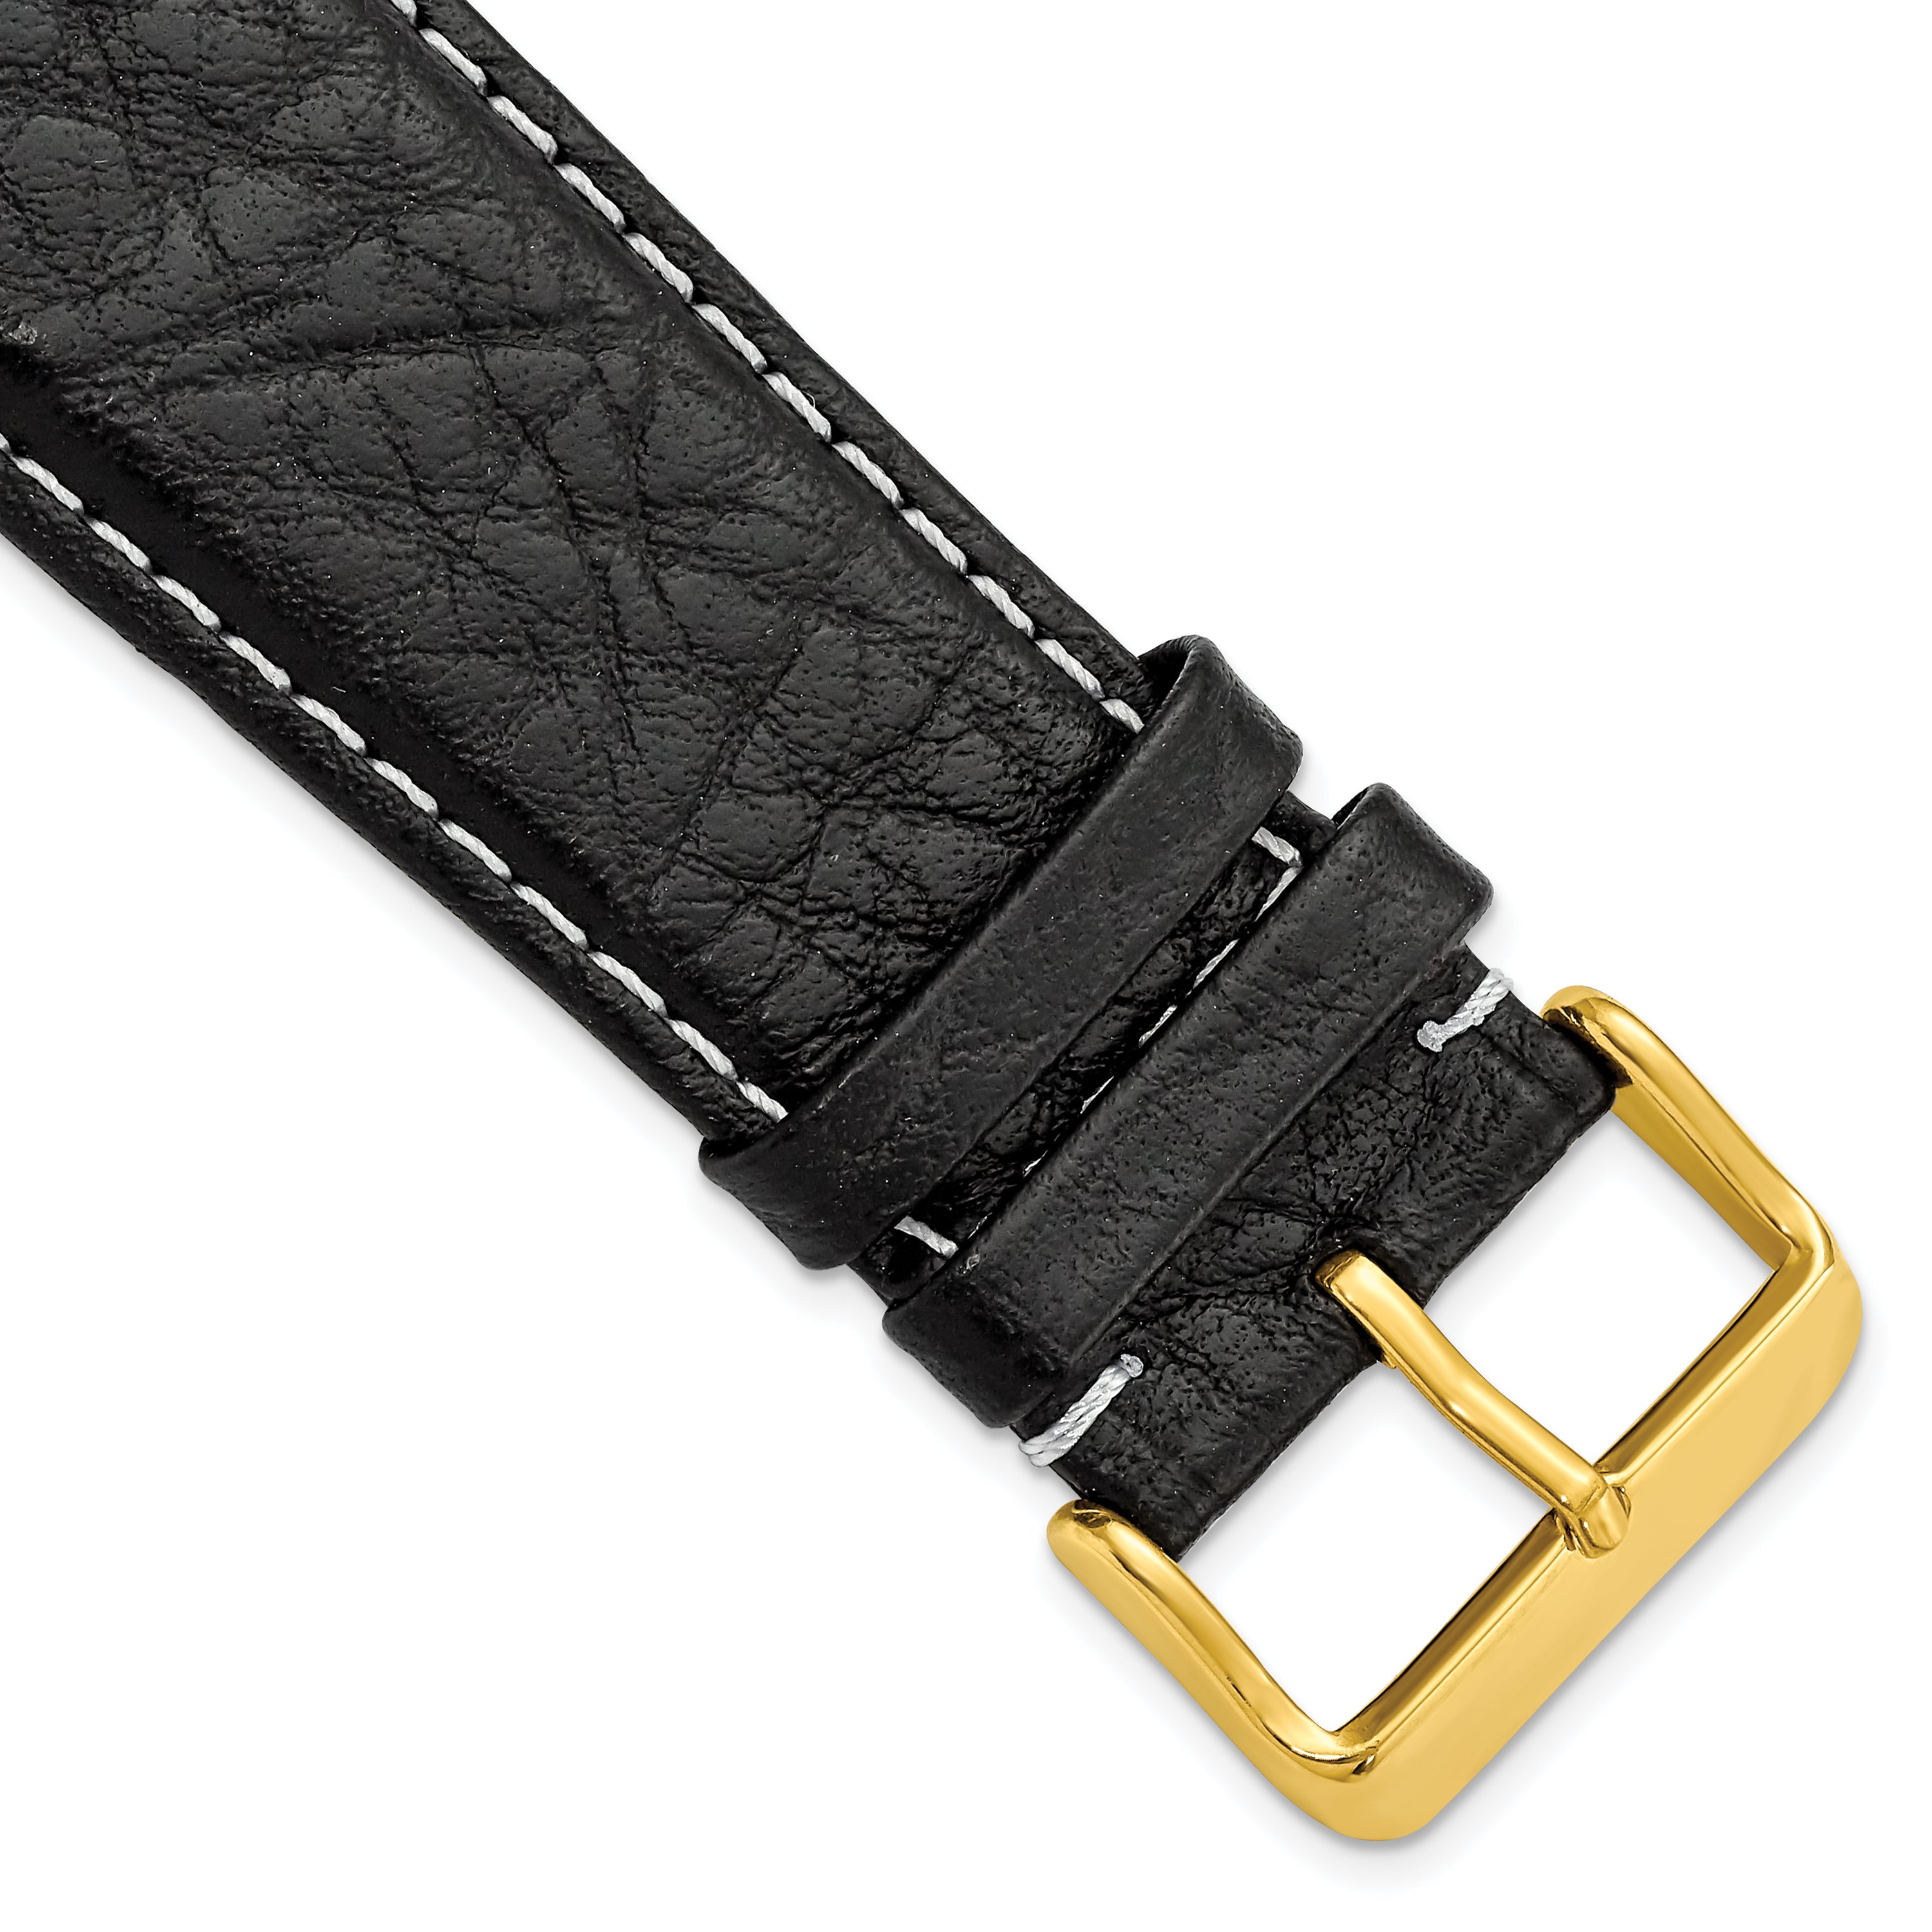 DeBeer 28mm Black Sport Leather with White Stitching and Gold-tone Buckle 7.5 inch Watch Band